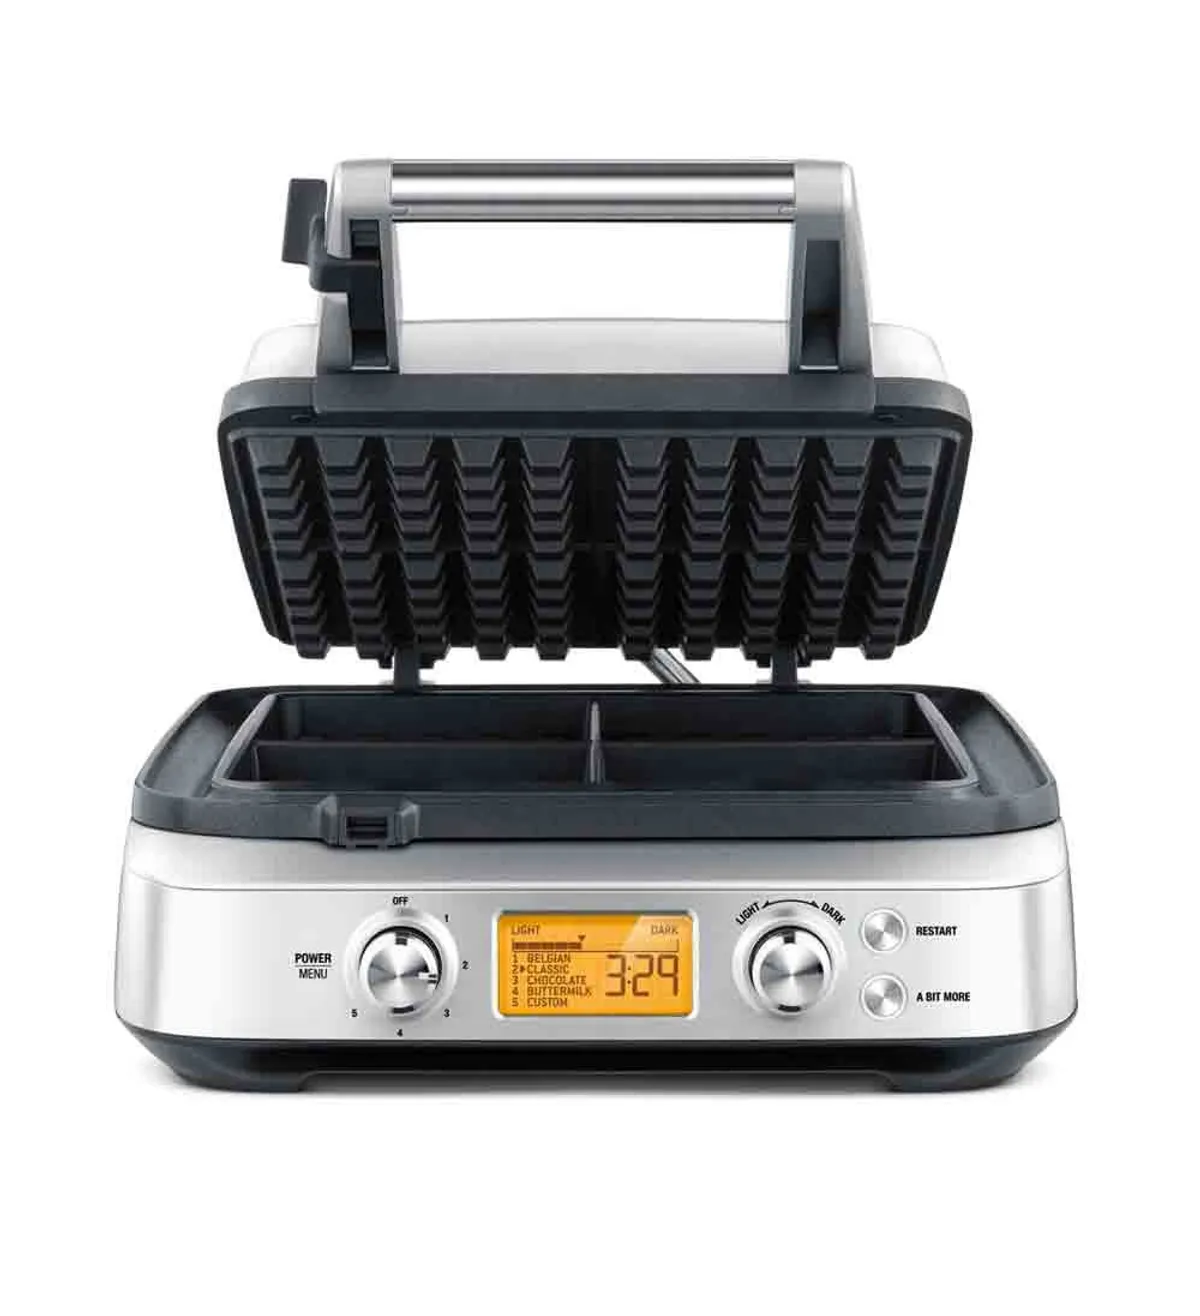 Breville Waffle Maker review